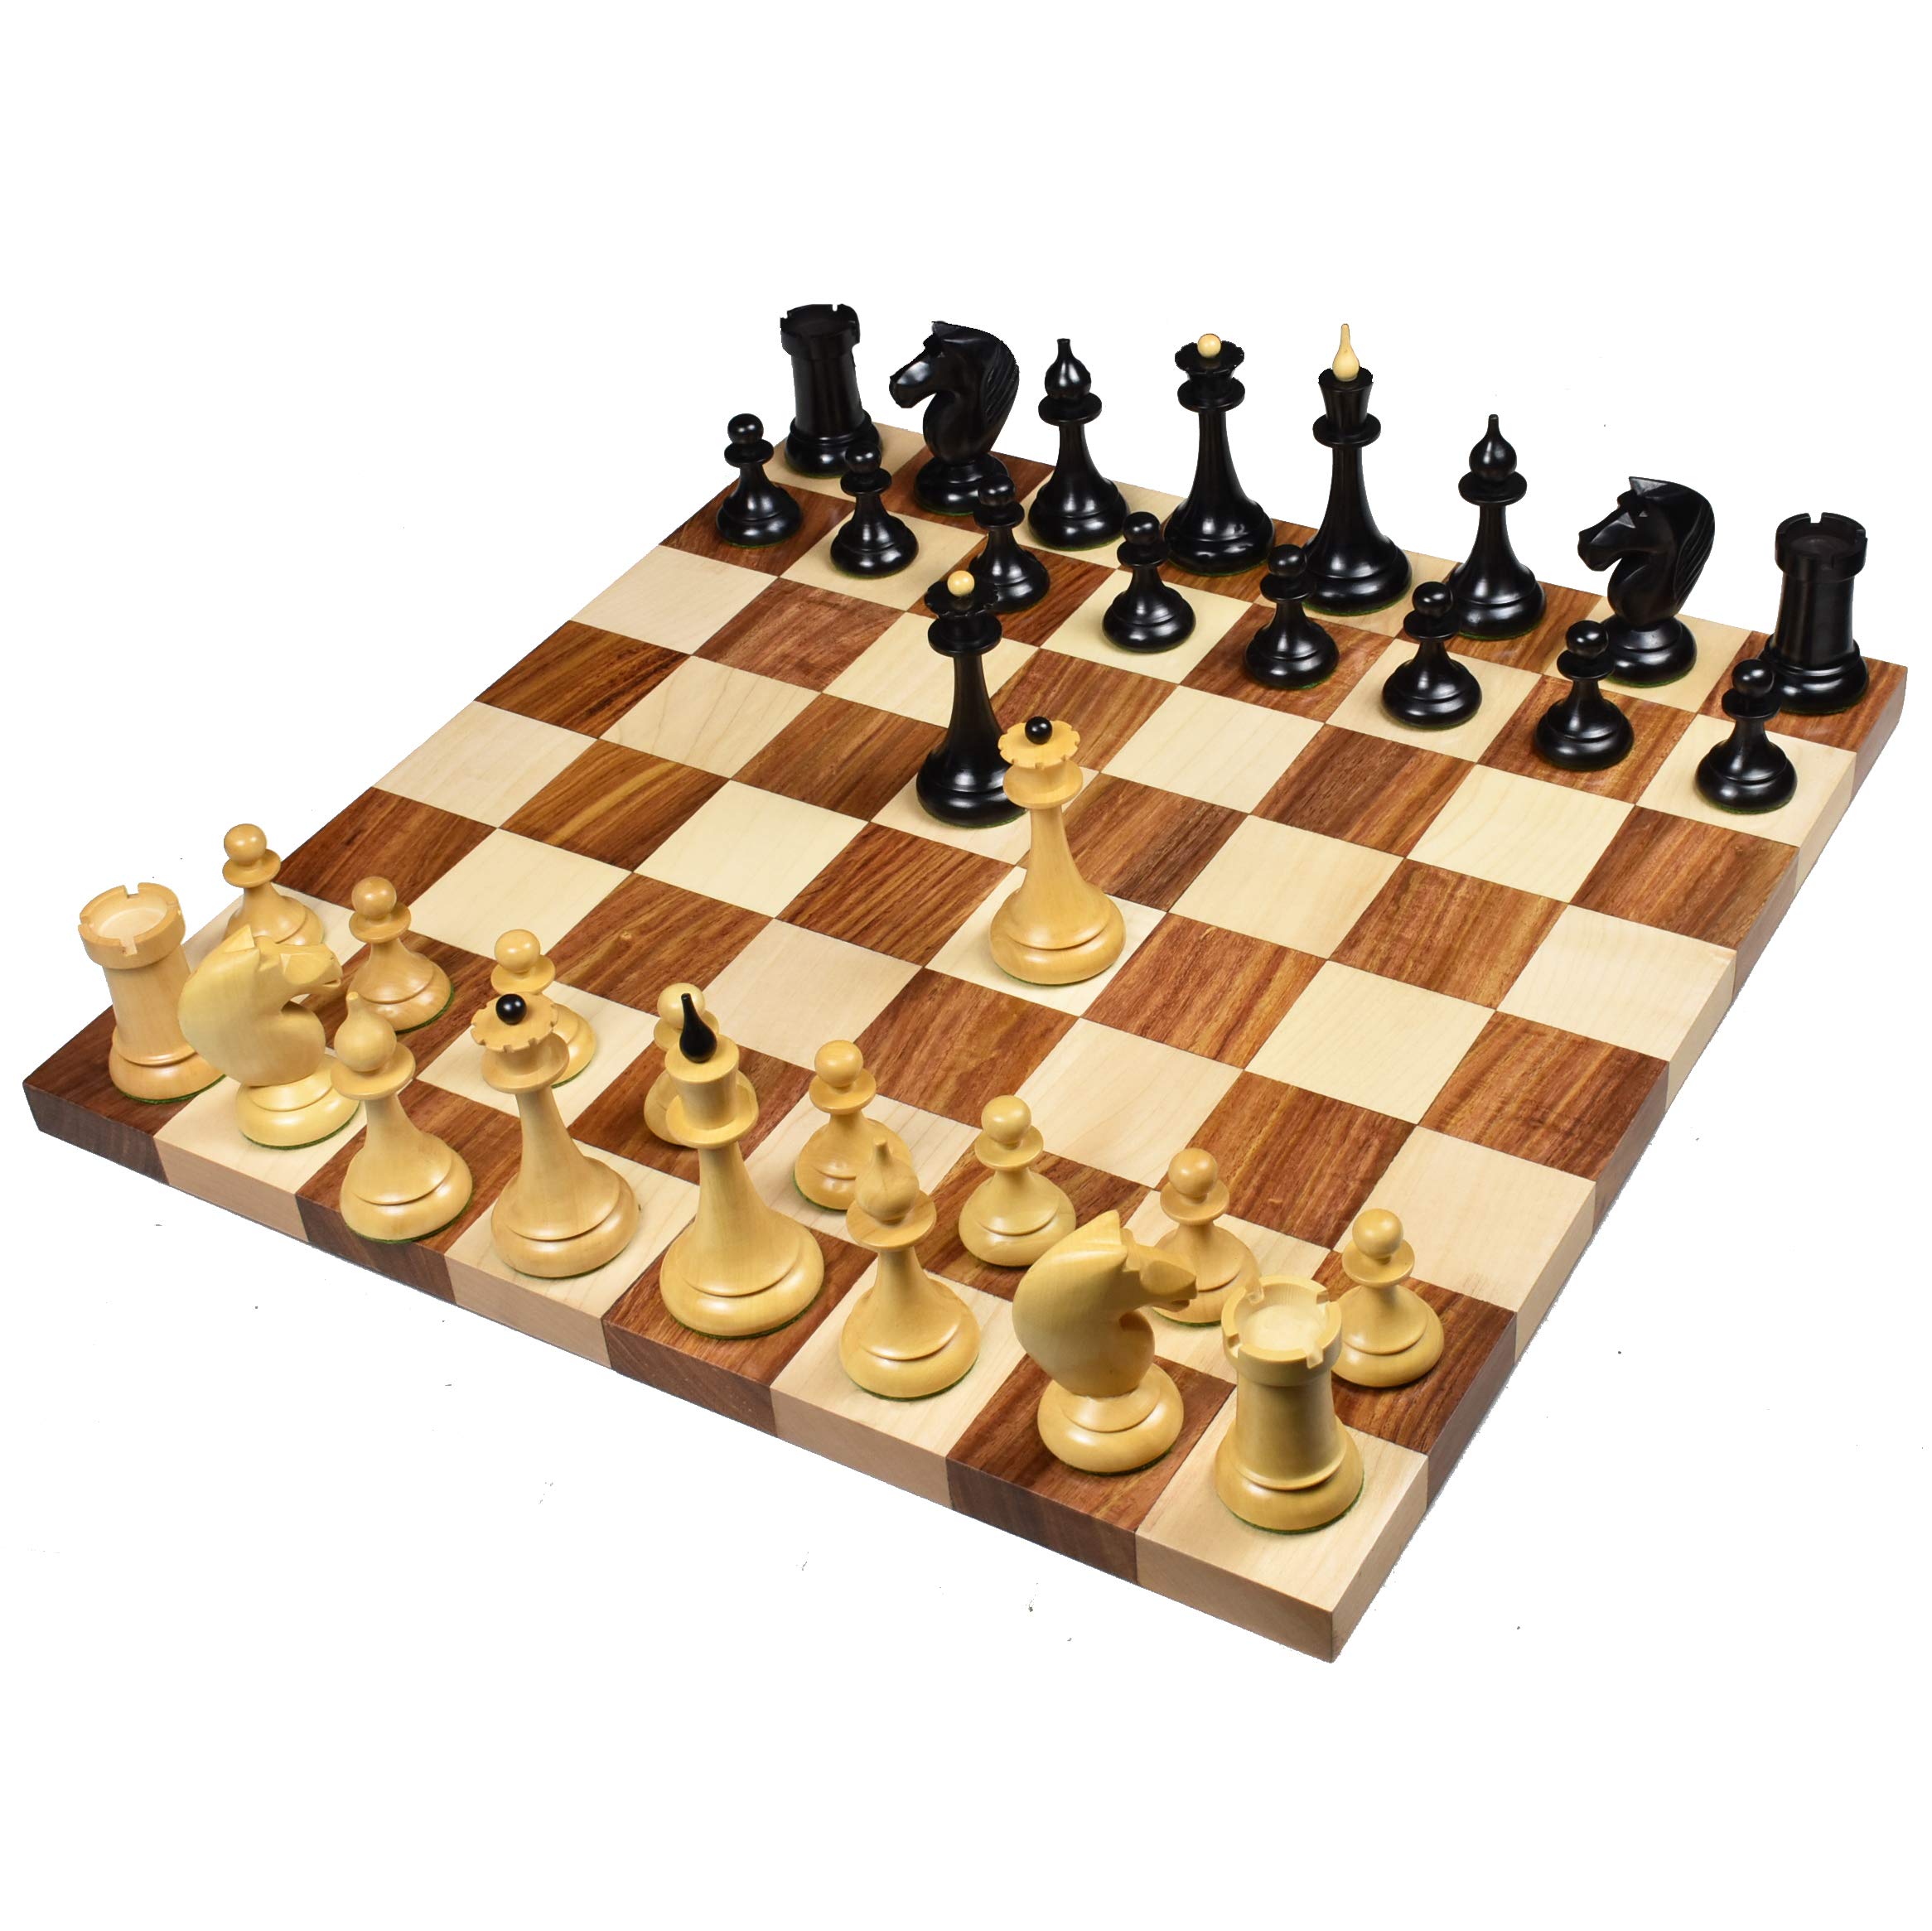 Royal Chess Mall 1950s Soviet Latvian Reproduced Chess Pieces Only Chess Set, Ebonized Boxwood Wooden Chess Set, 4-in King, Double Weighted Chess Pieces (2.5 lbs)